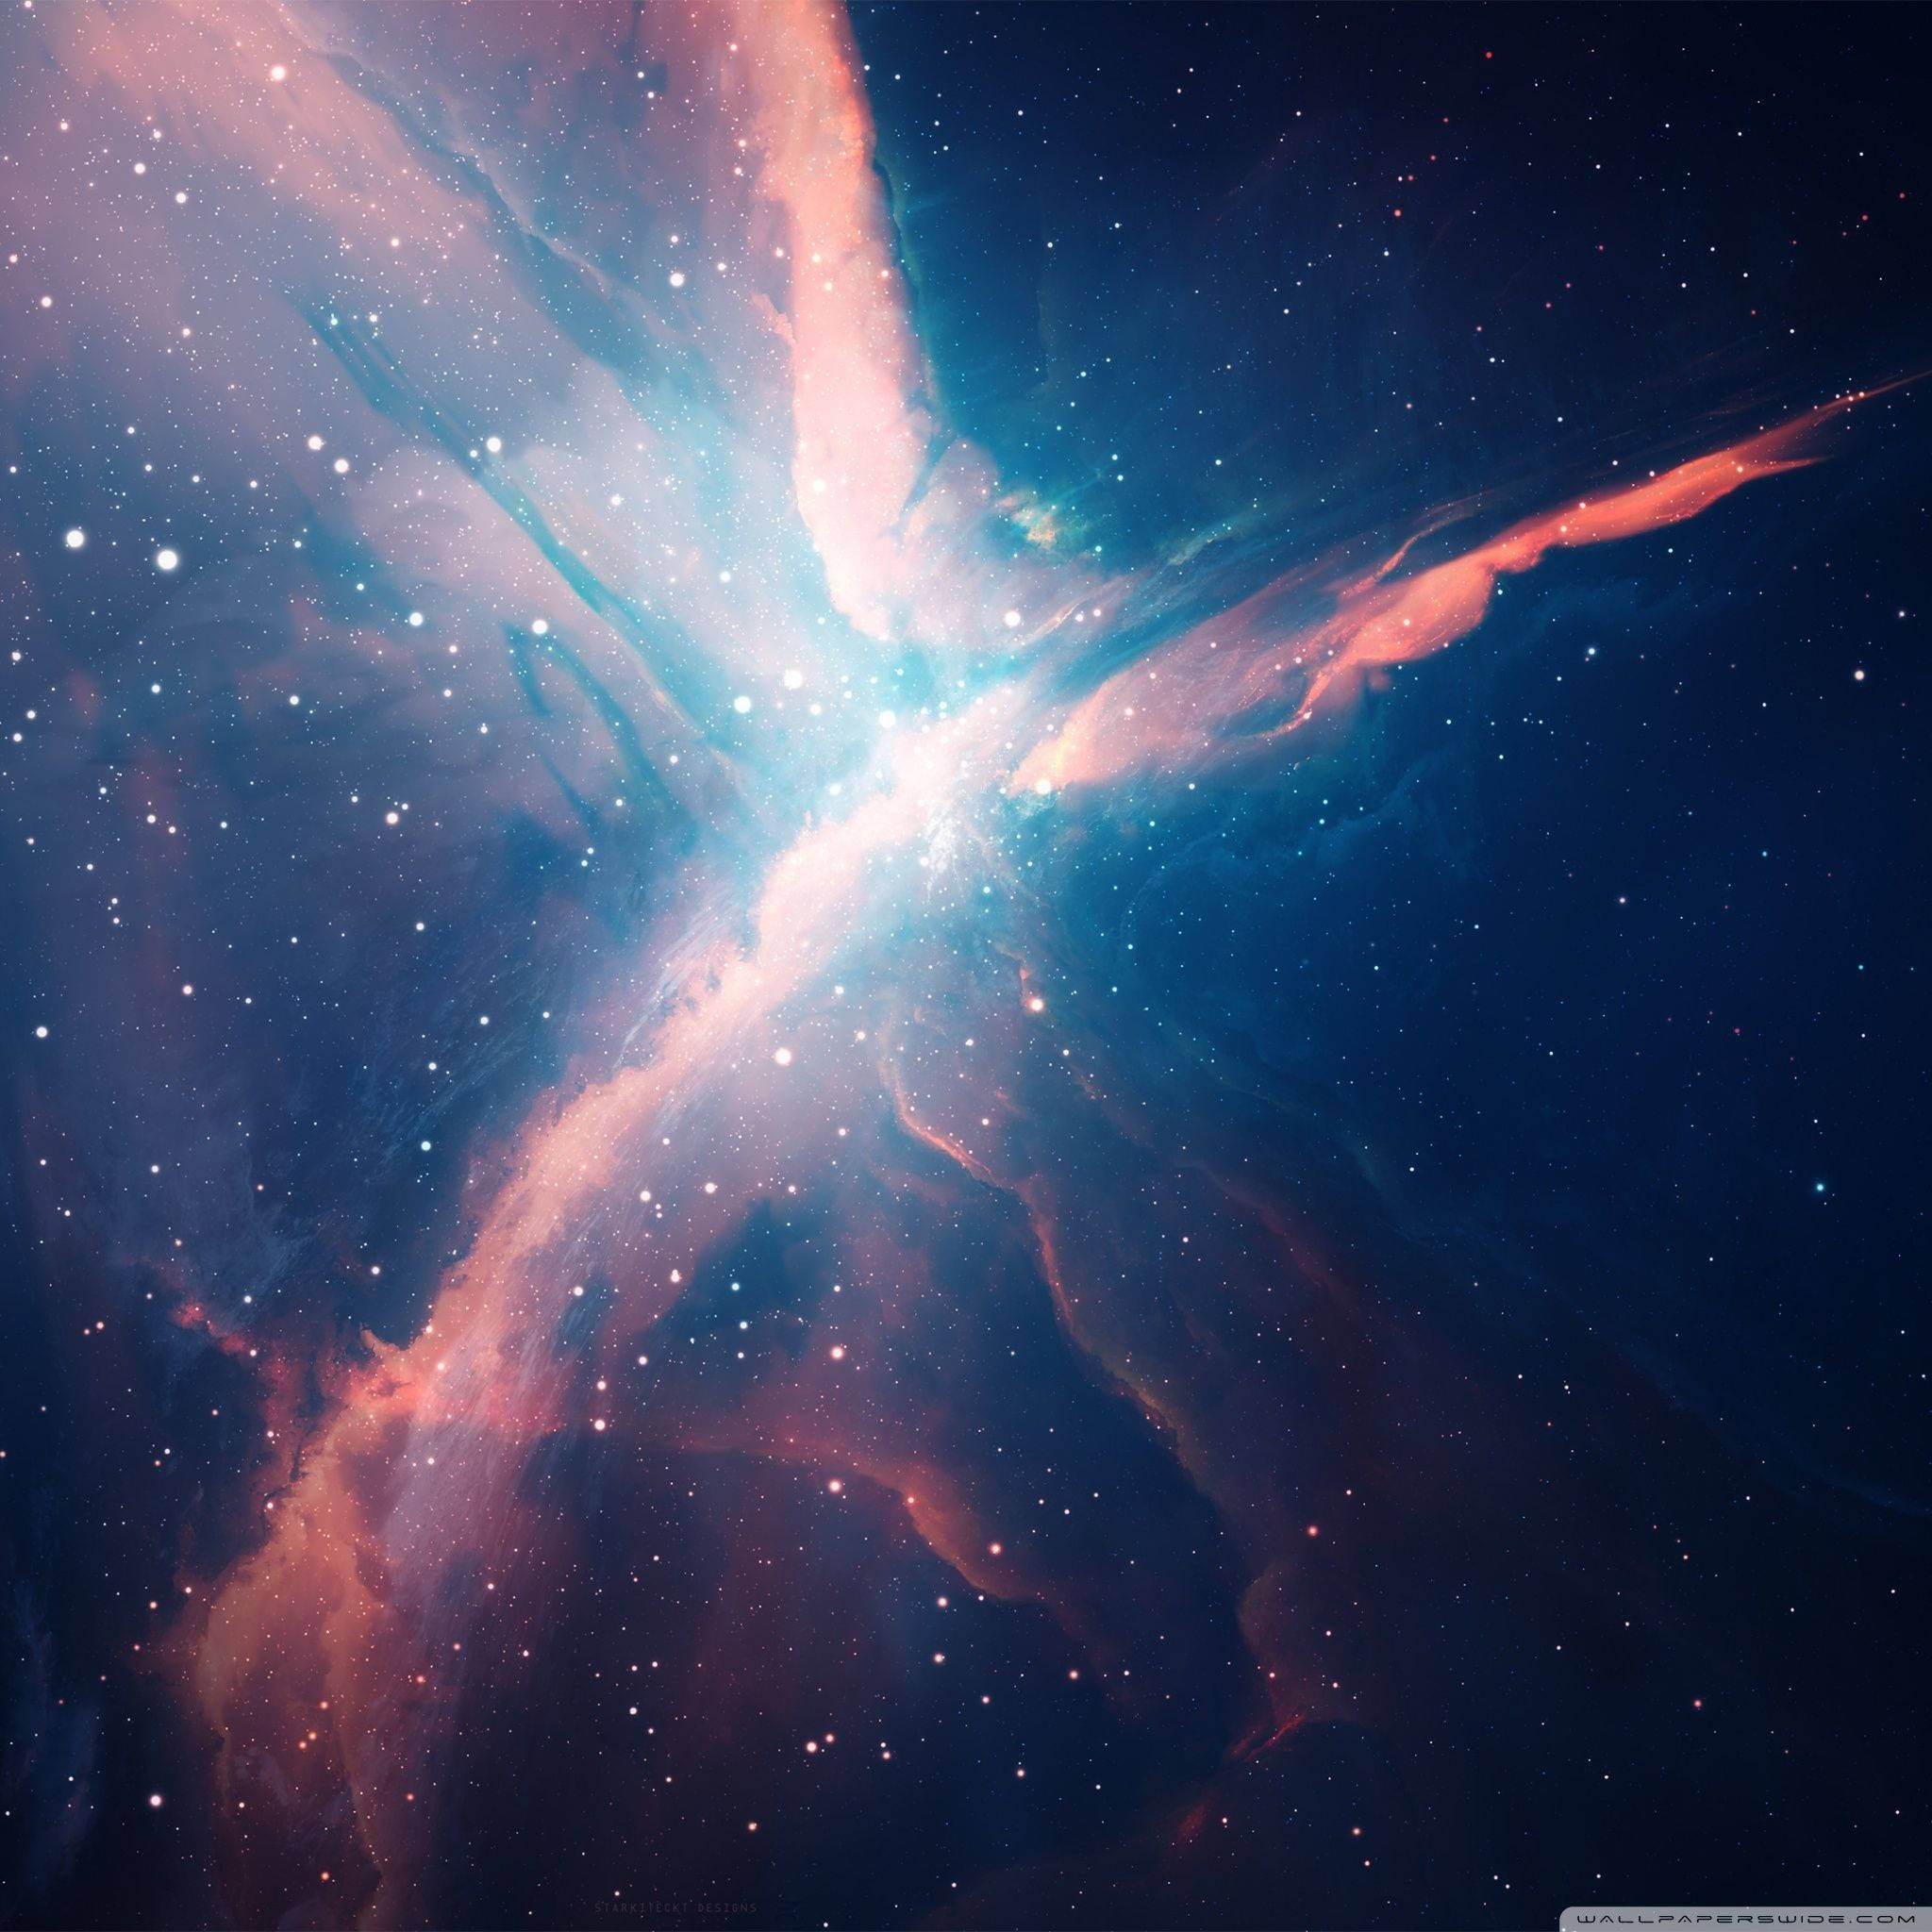 Glowing Galaxy As Official Ipad Theme Picture